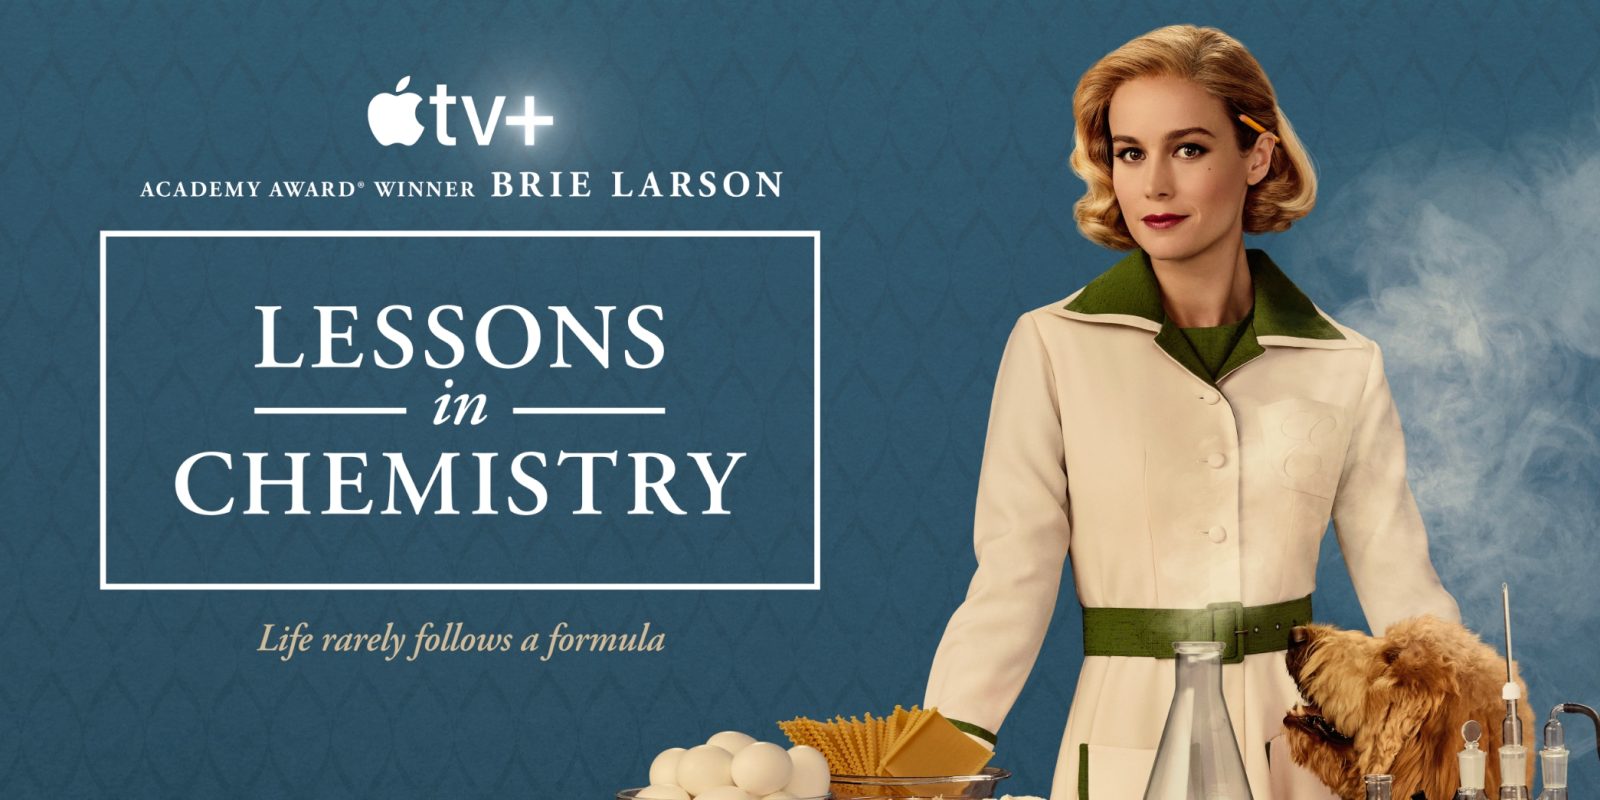 apple-tv-lessons-in-chemistry.jpg?quality=82&strip=all&w=1600